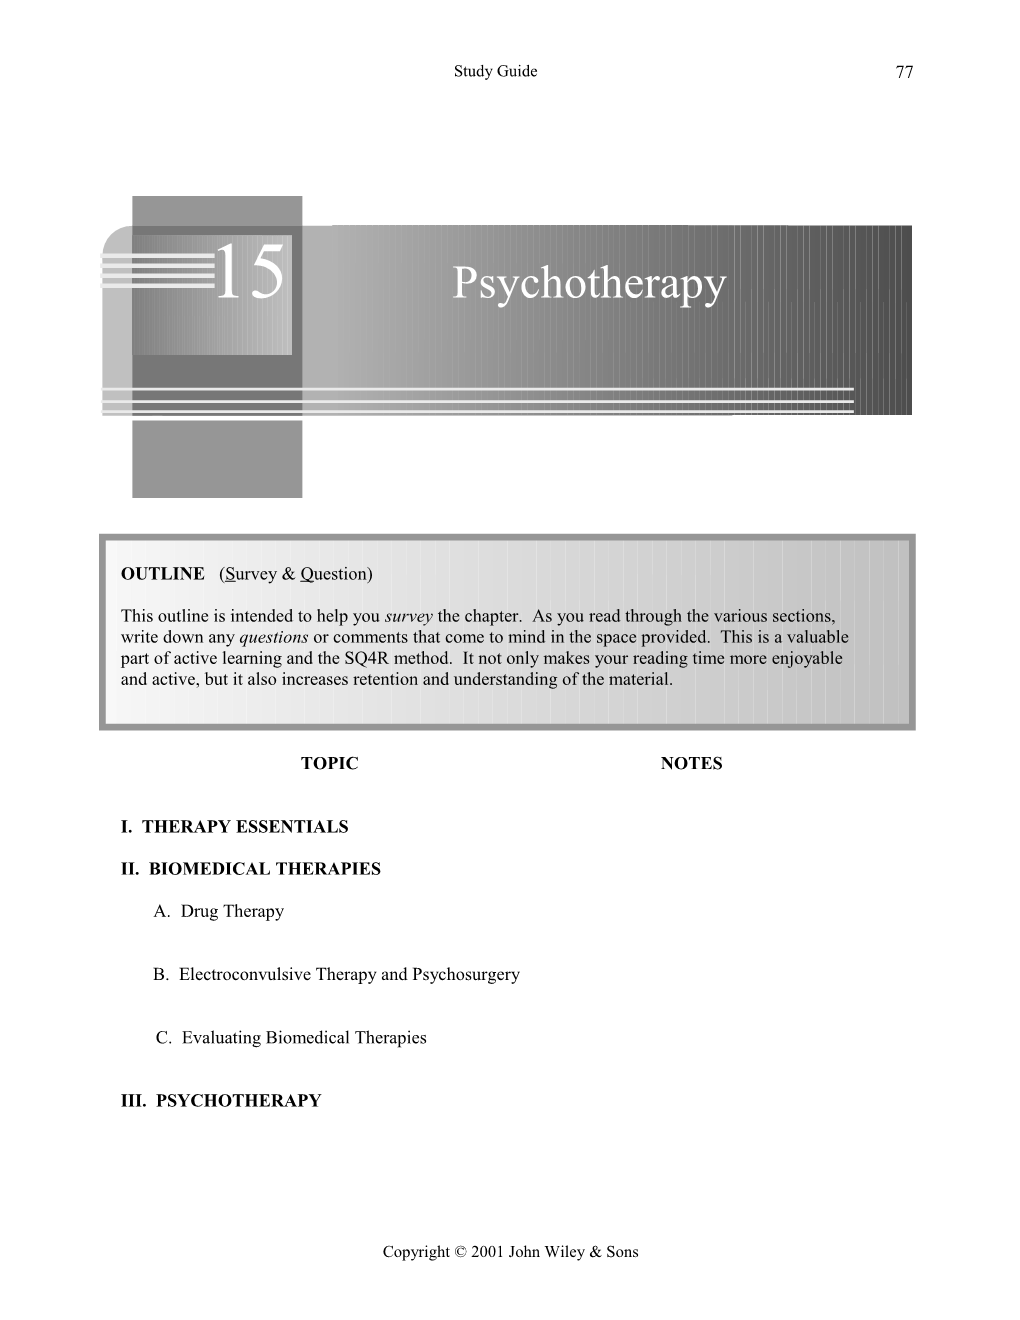 Psychotherapy Study Guide